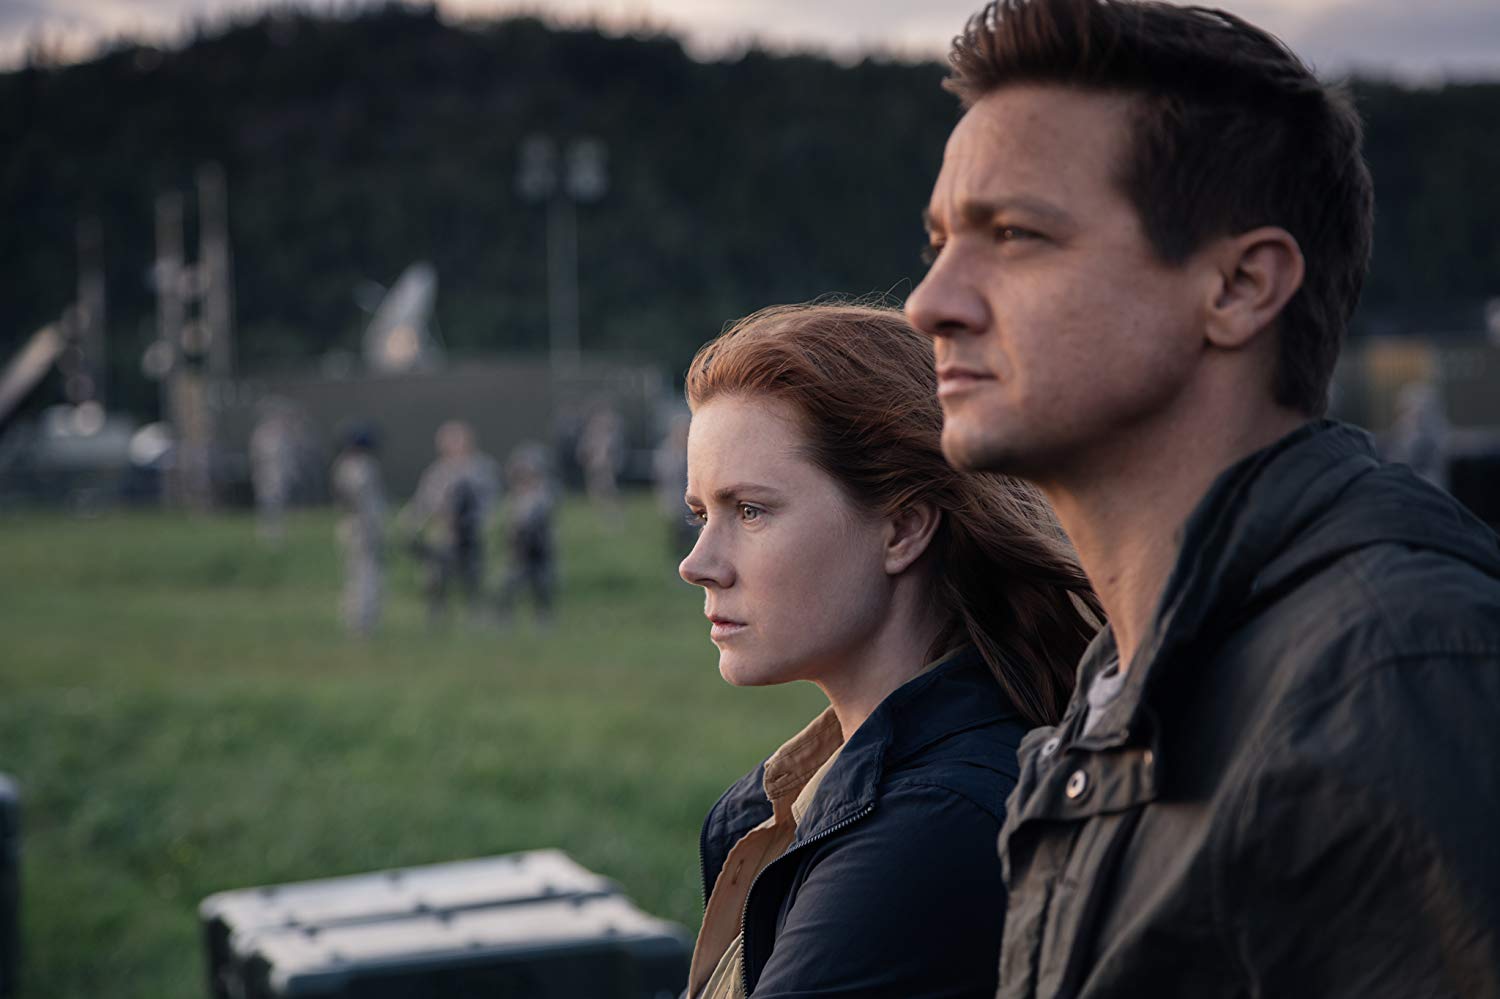 Louise and Ian contemplate things in Arrival